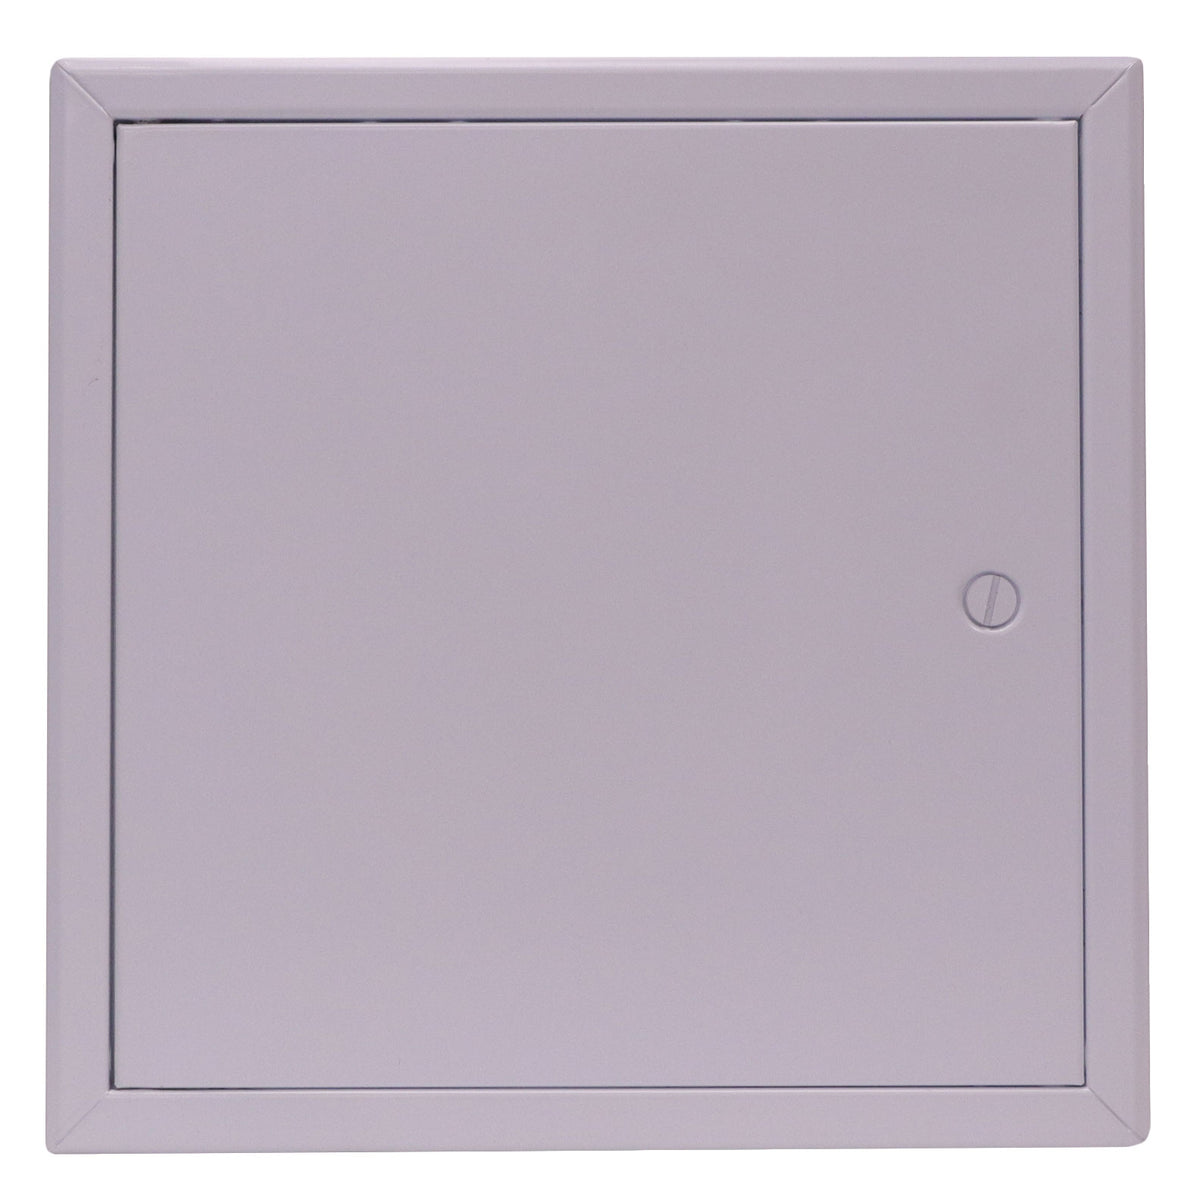 20&quot; X 20&quot; Steel Access Panel Removable Door For Concealed Wall / Ceiling Application With Slotted Lock - [Outer Dimensions: 21&quot; Width X 21&quot; Height]